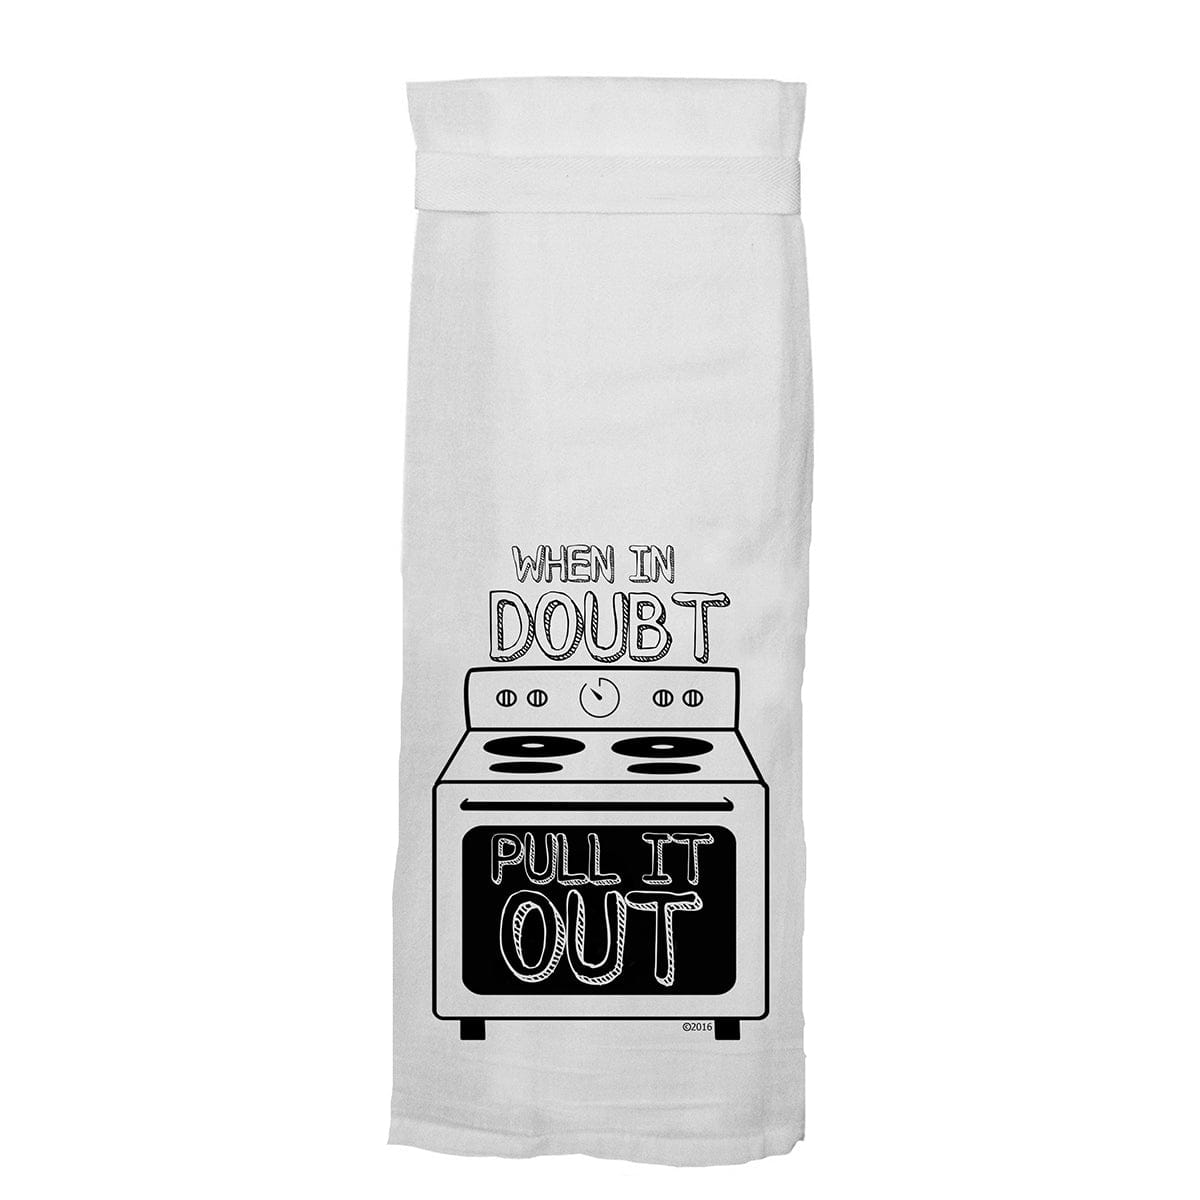 When In Doubt Pull It Out Flour Towel by Twisted Wares - rolik